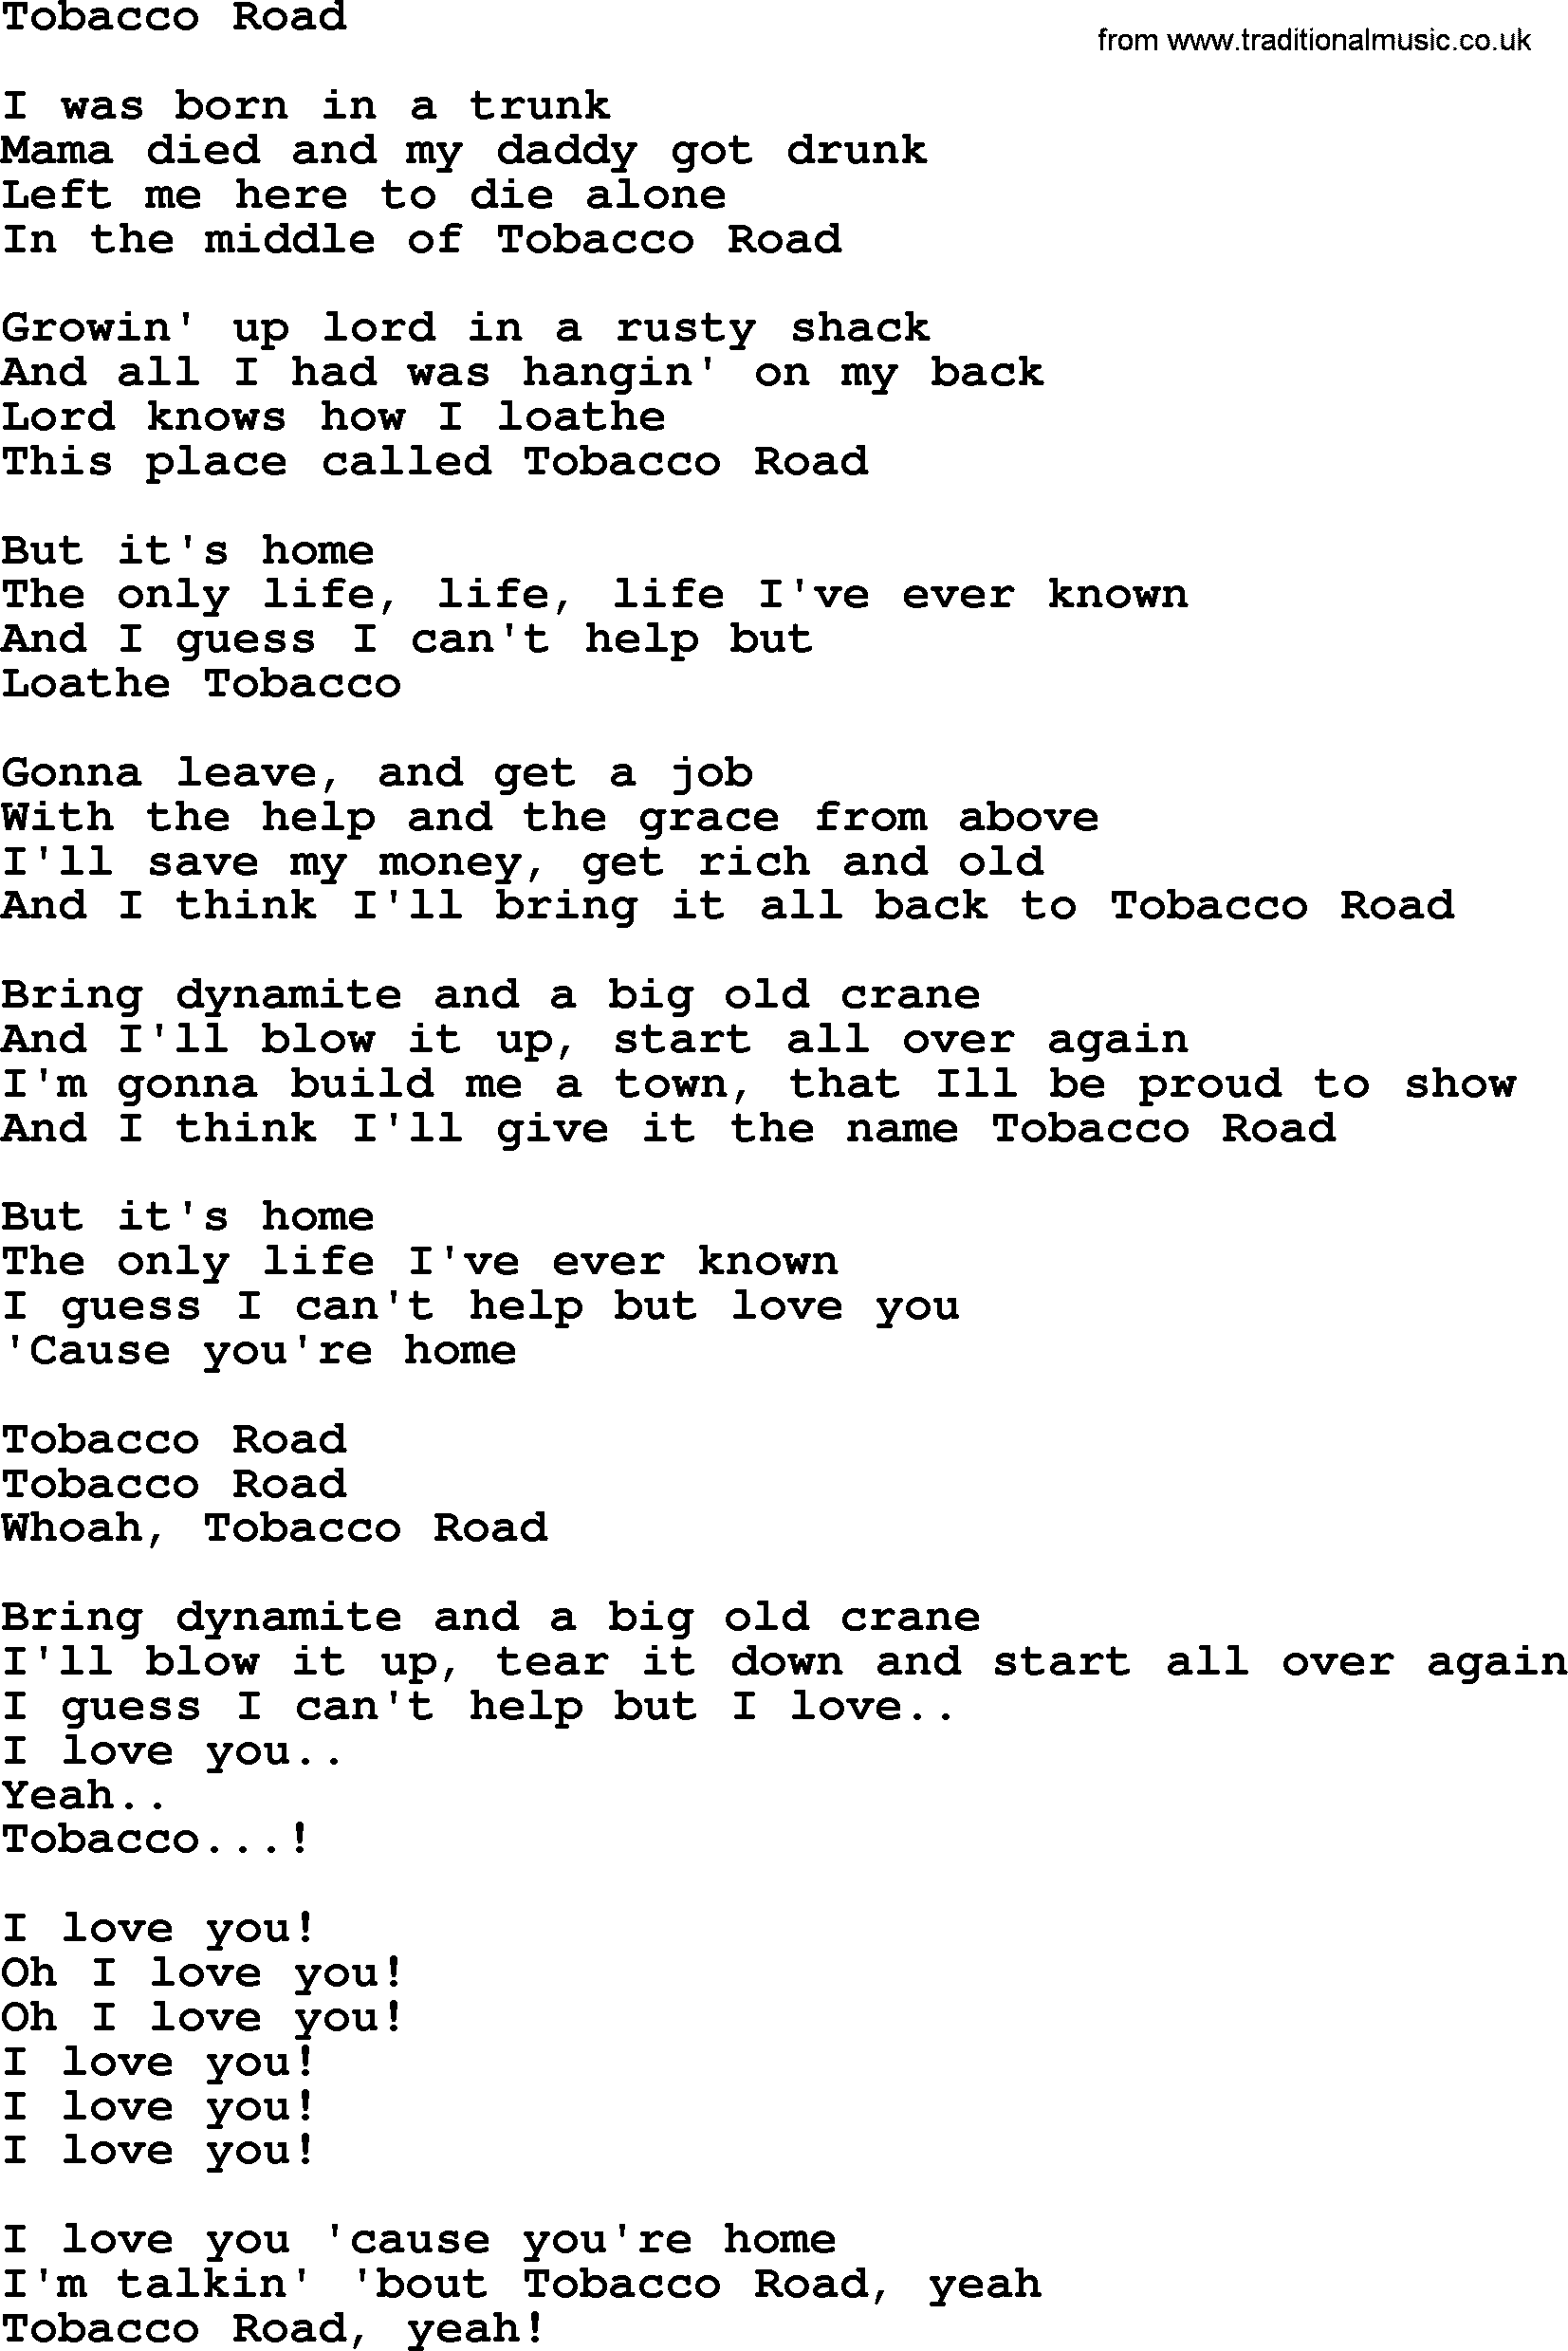 Tobacco Road By The Byrds Lyrics With Pdf Tobacco road lyrics by d: traditional music library